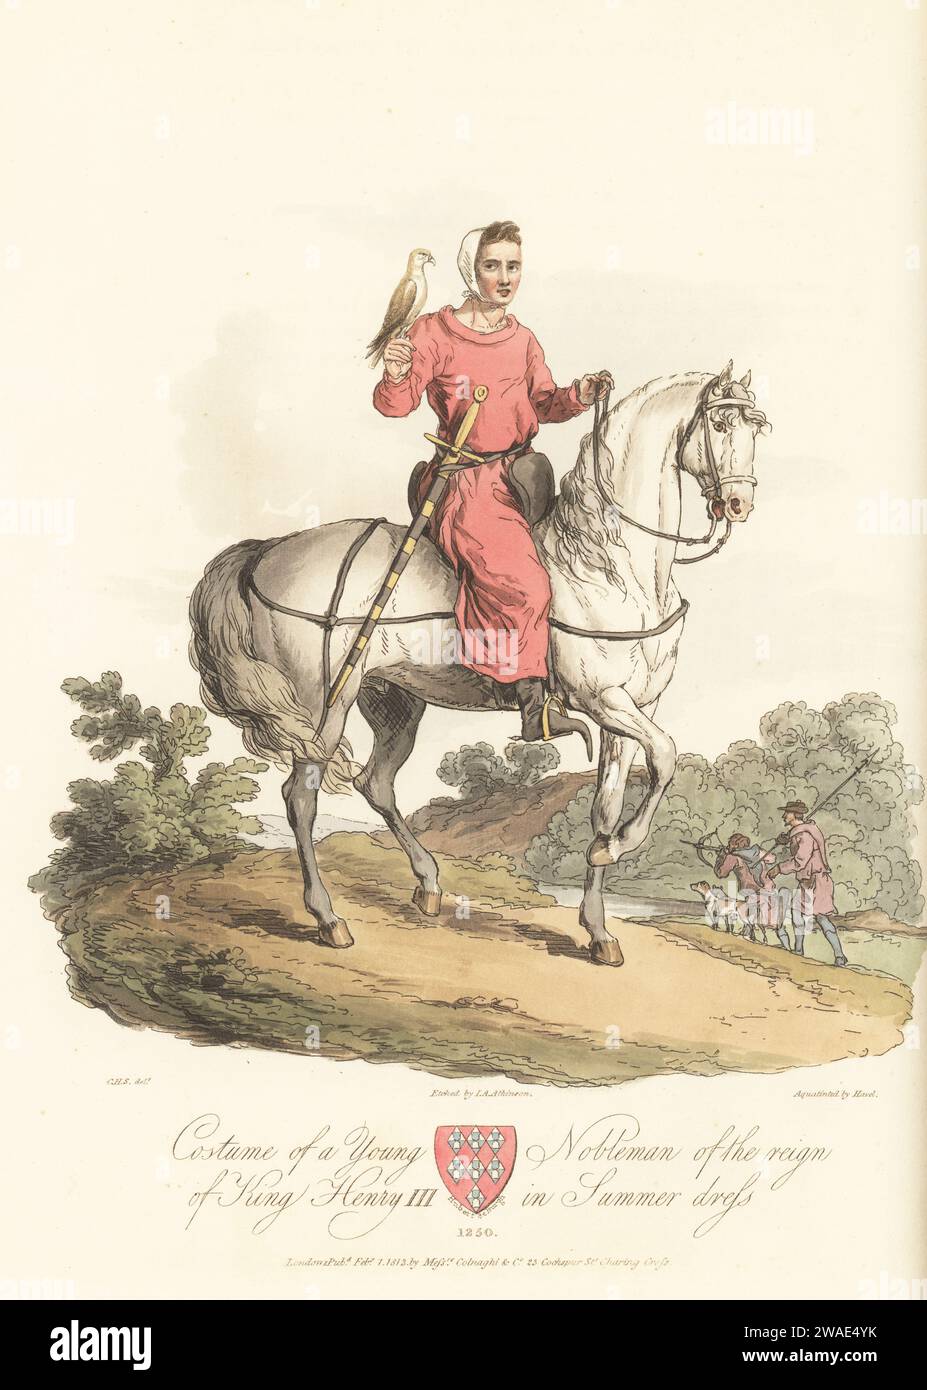 Costume of a young nobleman in summer riding dress, reign of King Henry III. In white coif, long gown, long boots, with sword and spurs, holding a hawk, taken from a book of fables, Royal Library MS 19 C I. Gamekeeper and hunter with crossbow from MS 20 D I. Coat of arms of Hubert de Burgh, Earl of Kent, Gules, seven mascles vaire, 1250. Handcoloured copperplate engraving etched by John Augustus Atkinson, aquatinted by Havell, after an illustration by Charles Hamilton Smith from his own Selections of Ancient Costume of Great Britain and Ireland, Colnaghi and Co., London, 1814. Stock Photo